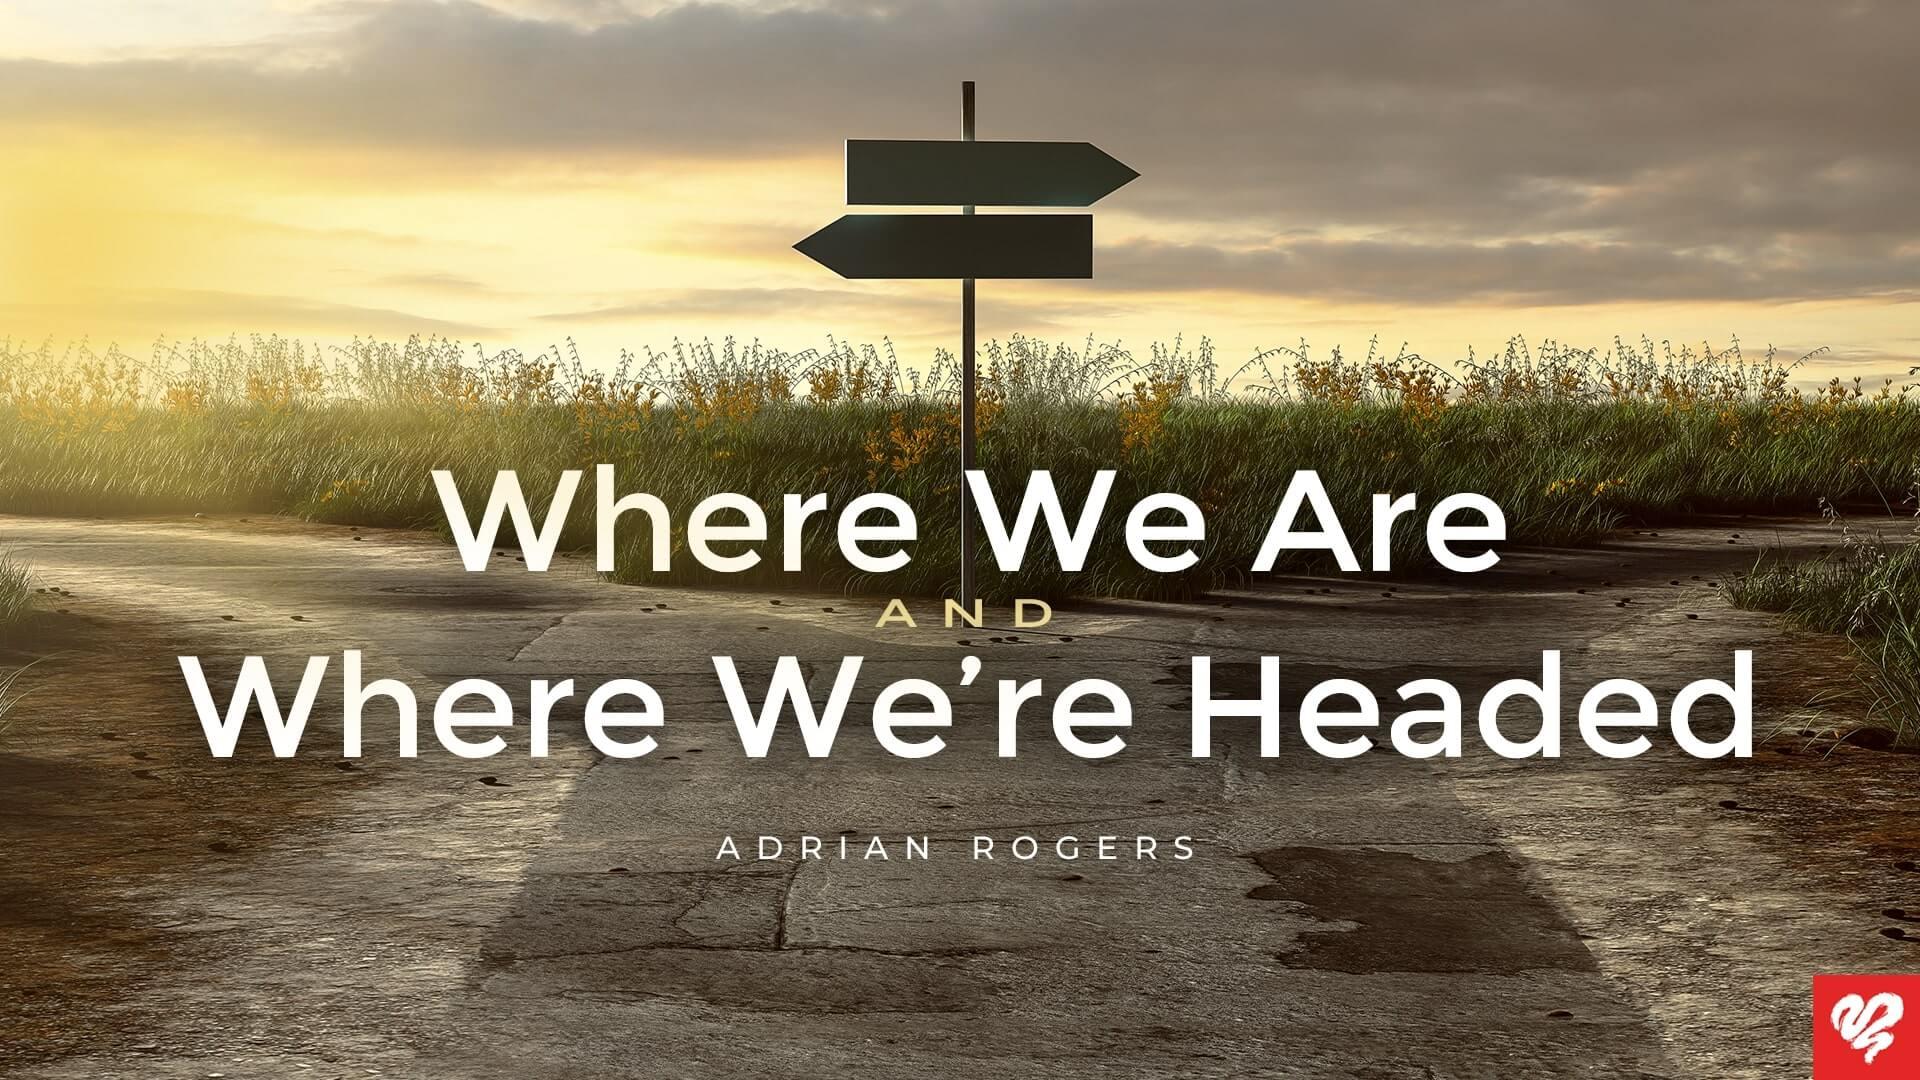 Where We Are and Where We're Headed Article 1920x1080